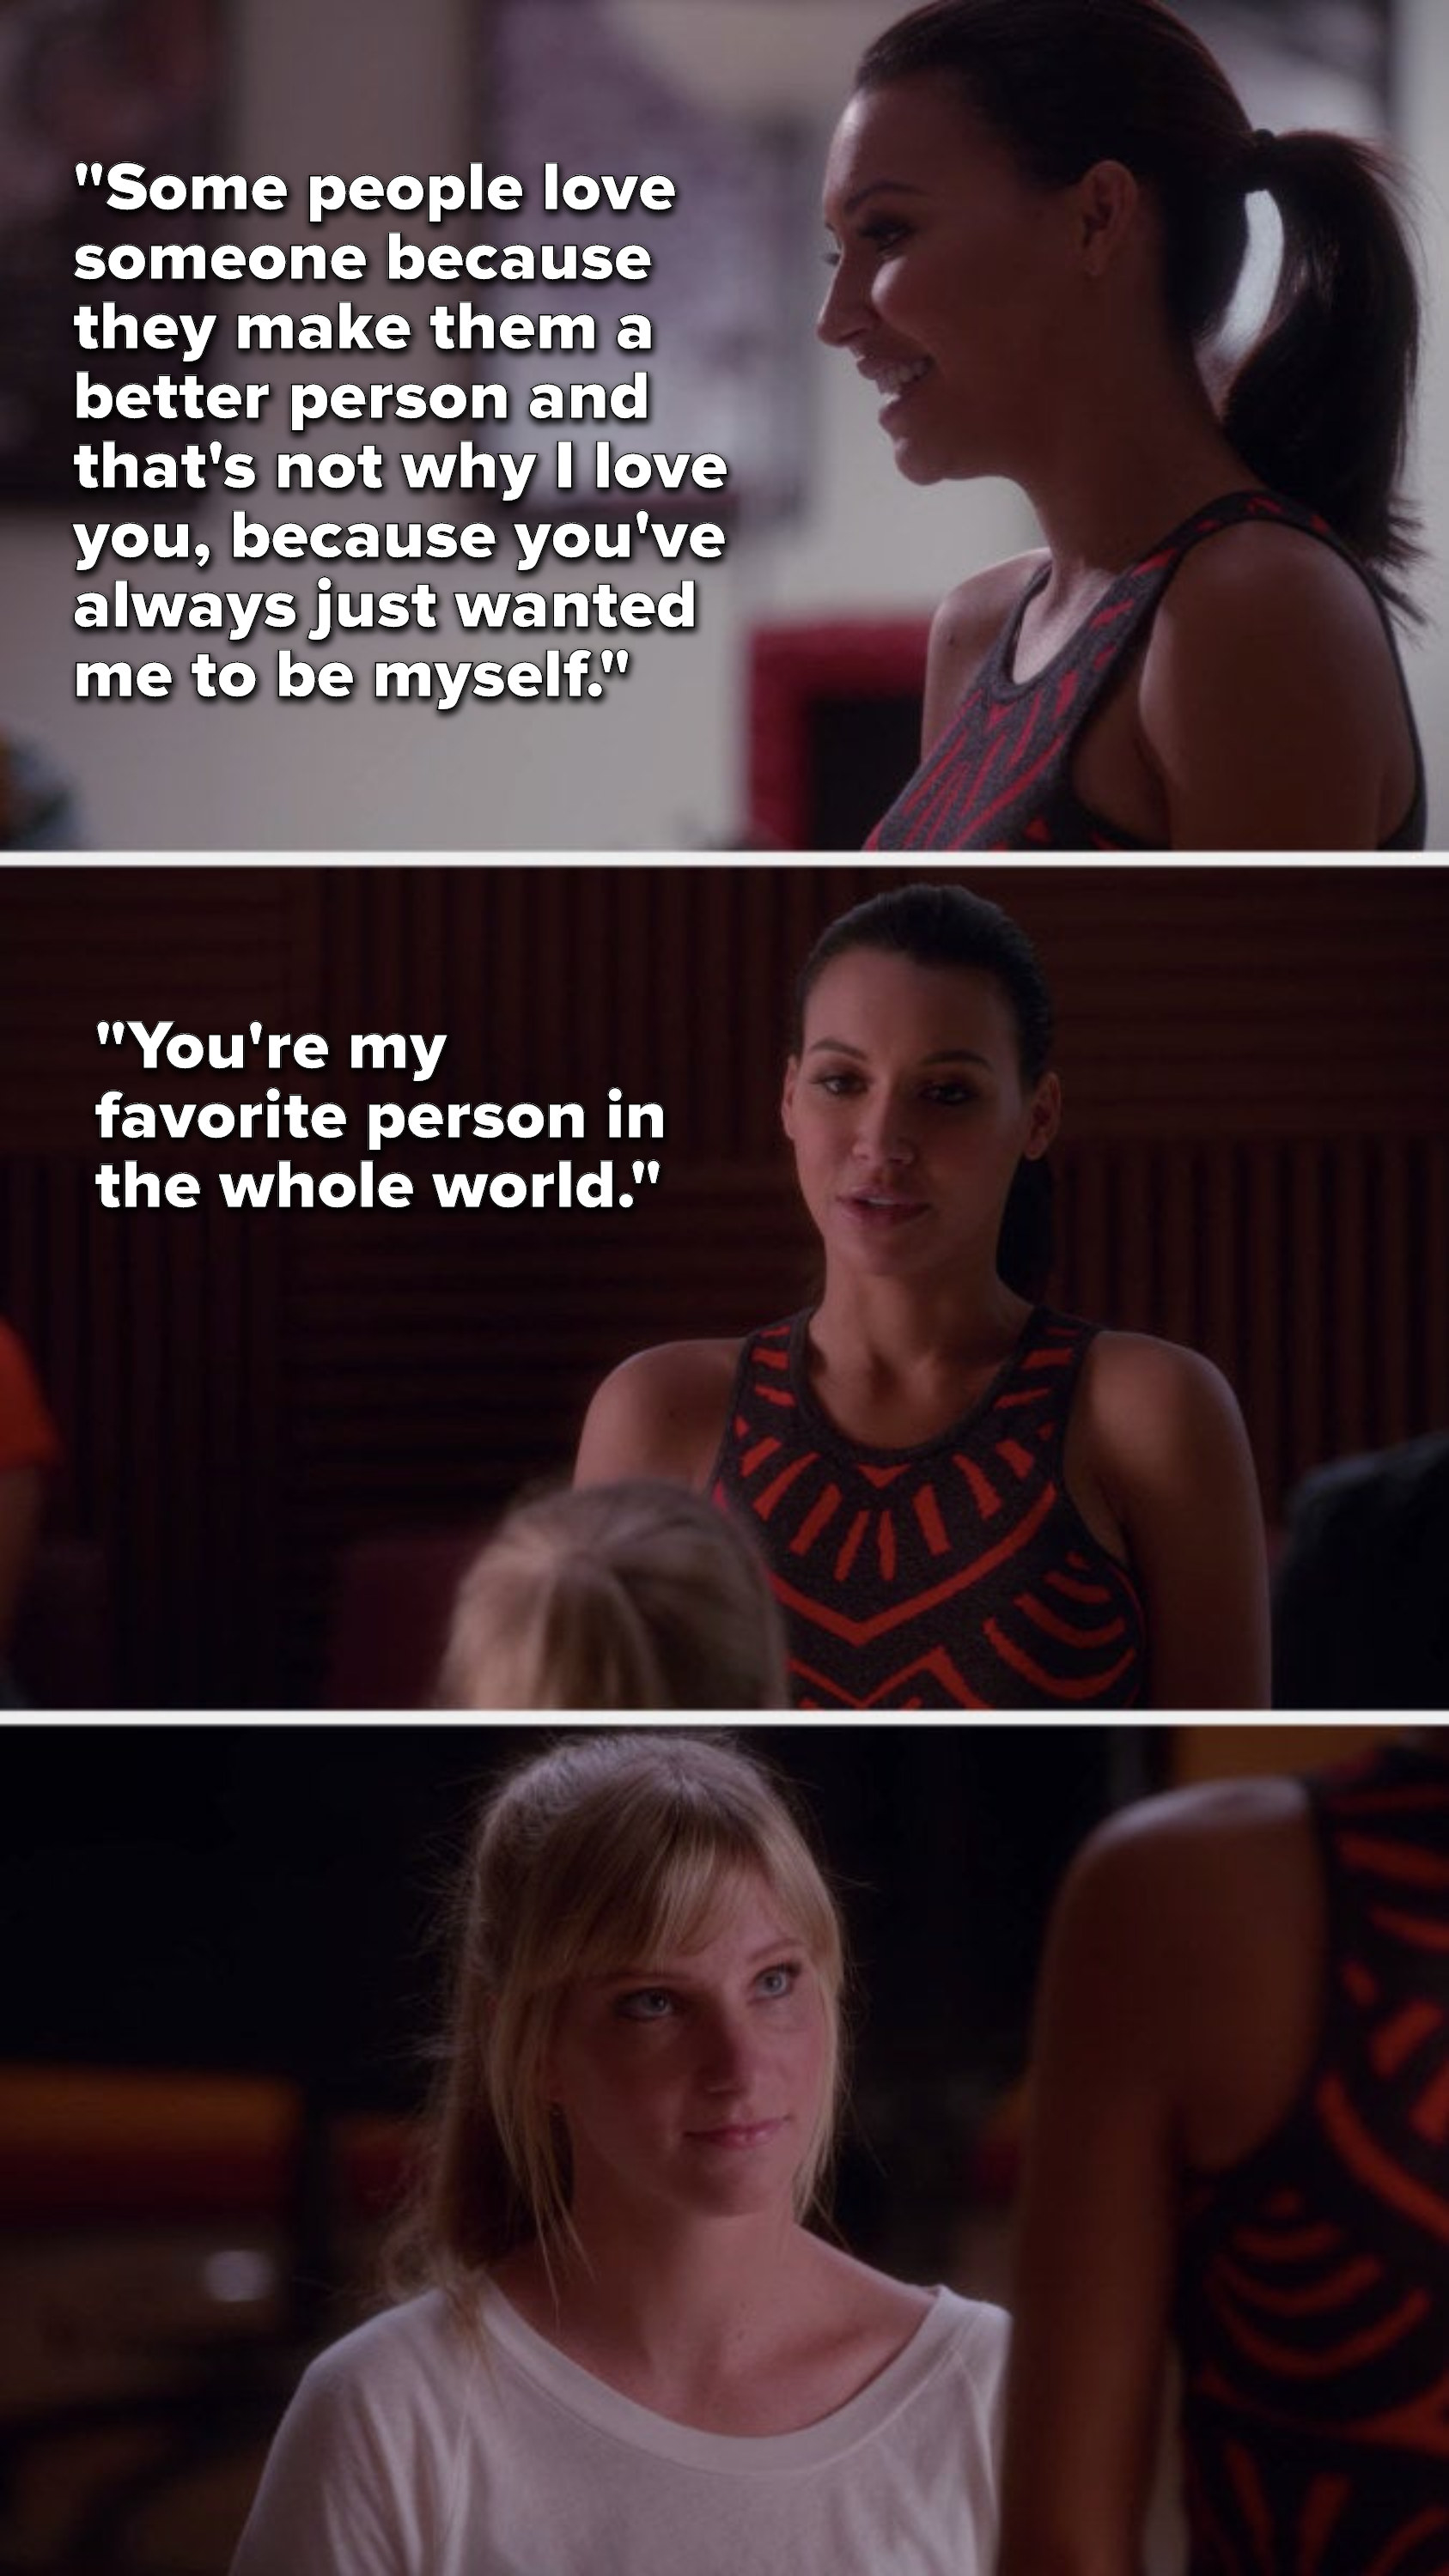 Santana says, &quot;Some people love someone because they make them a better person and that&#x27;s not why I love you, because you&#x27;ve always just wanted me to be myself, you&#x27;re my favorite person in the whole world&quot;